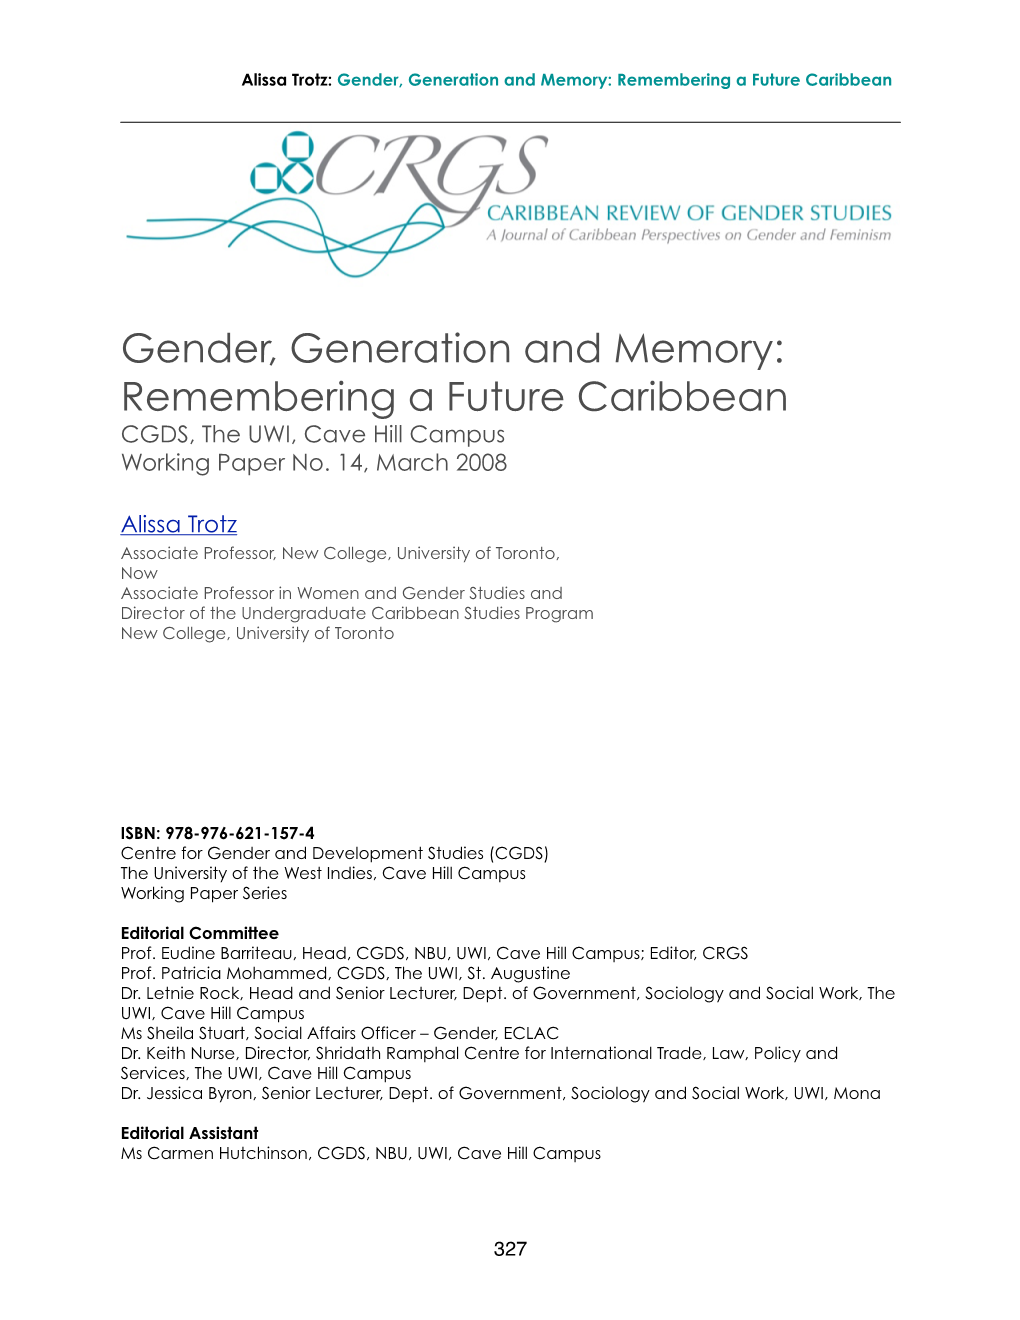 Gender, Generation and Memory: Remembering a Future Caribbean